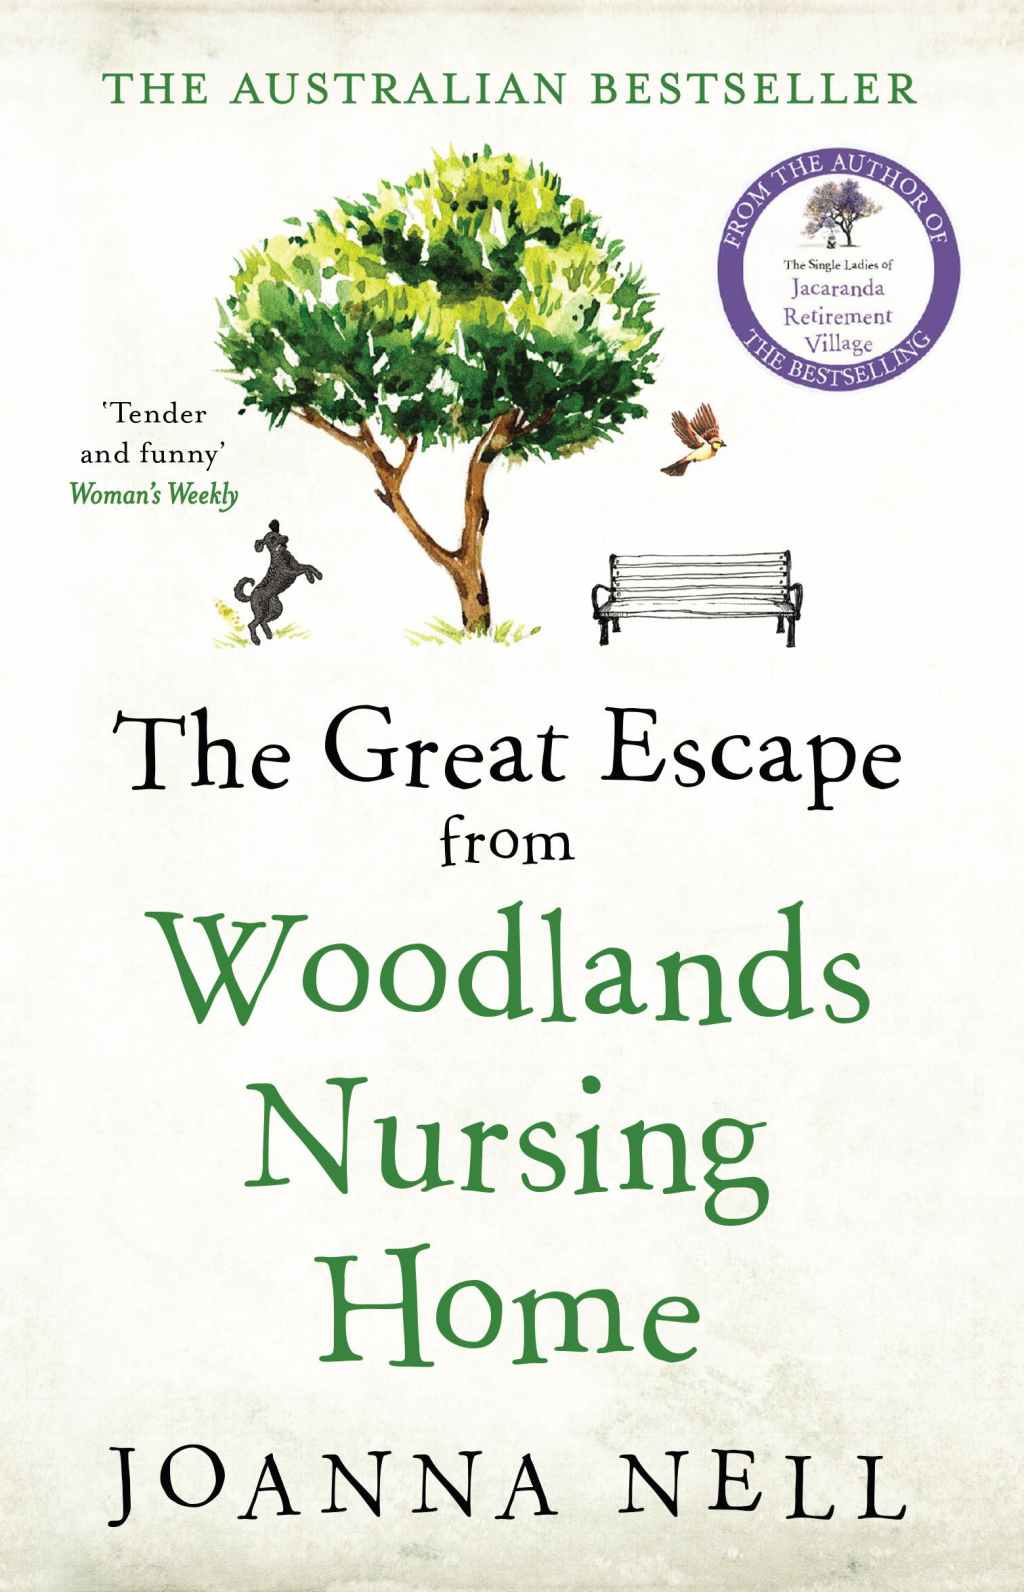 The Great Escape from Woodlands Nursing Home by Joanna Nell